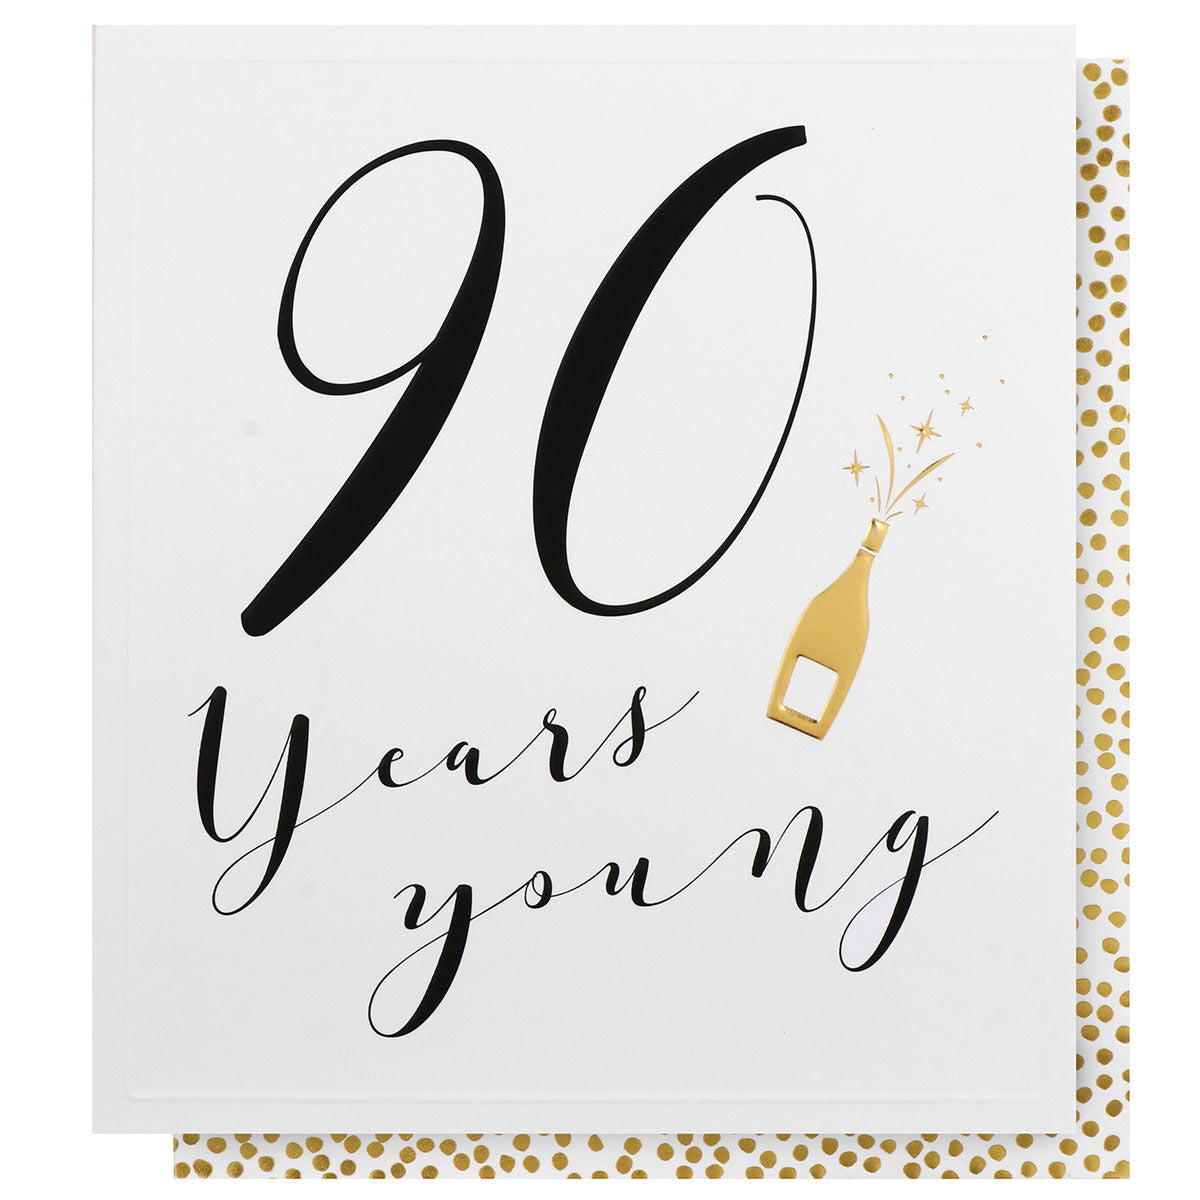 90th Birthday Card - No Frills Golden Champagne Popping